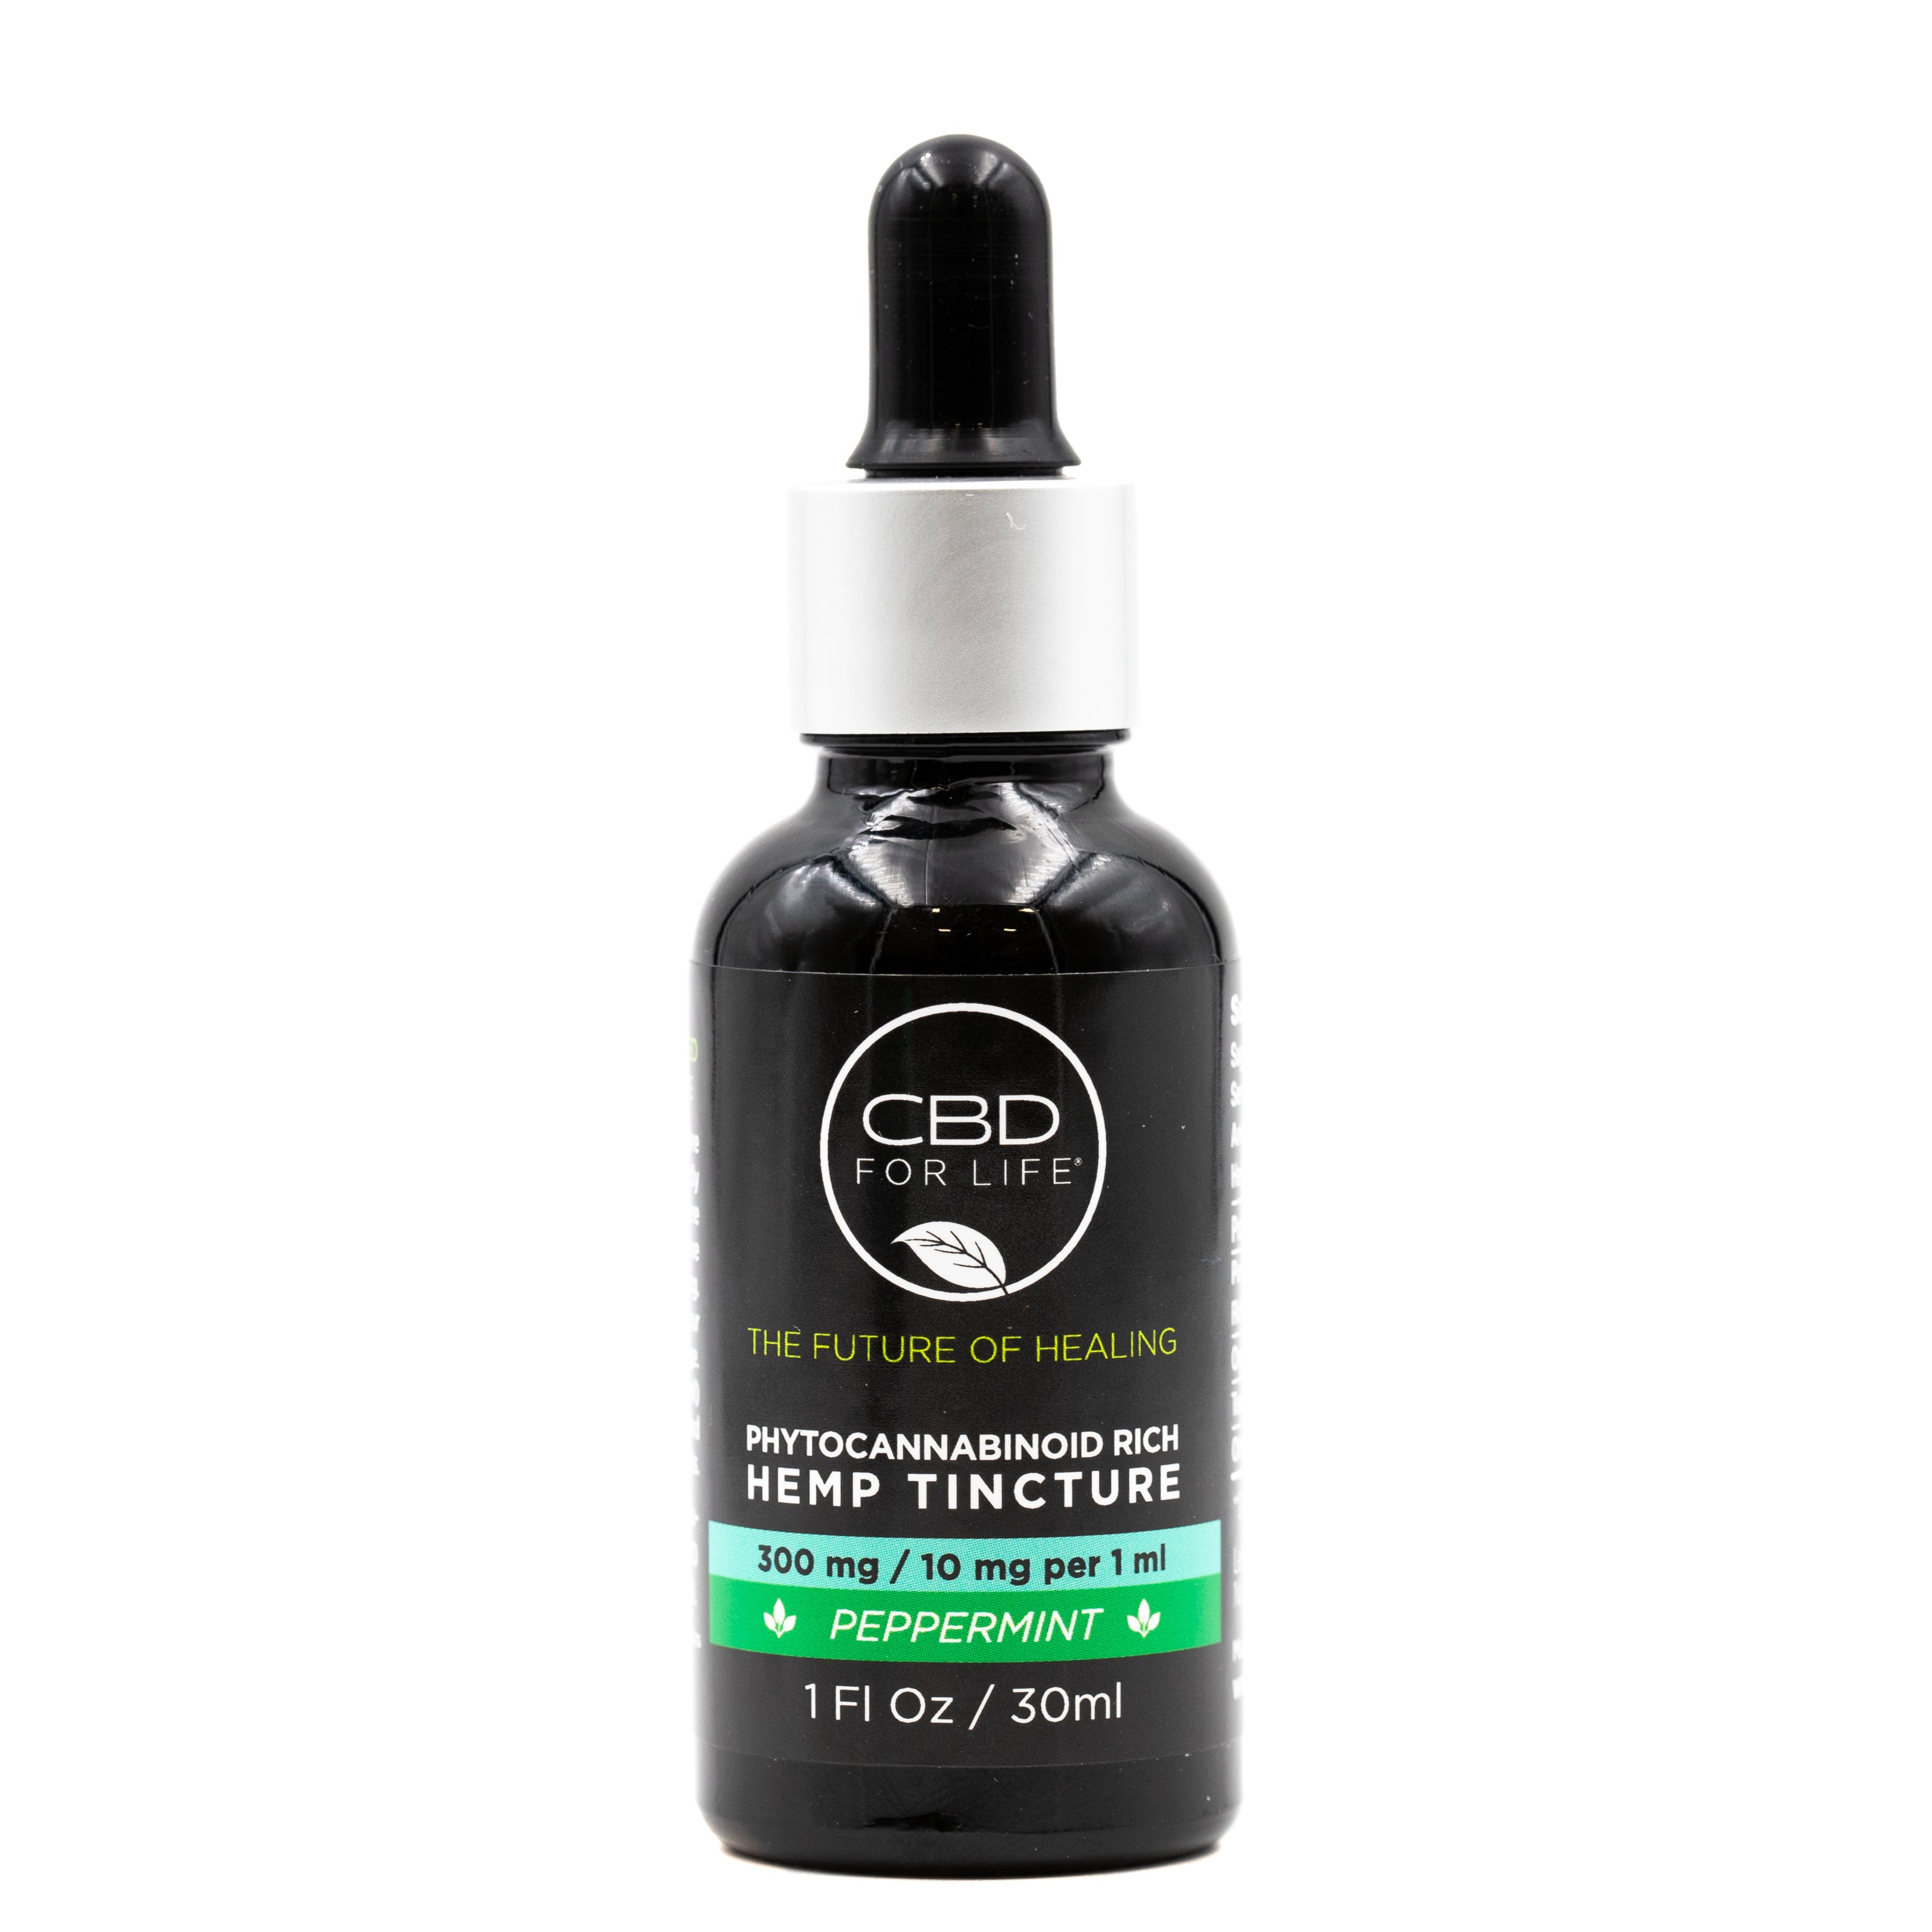 CBD For Life Peppermint Tincture 300 mg